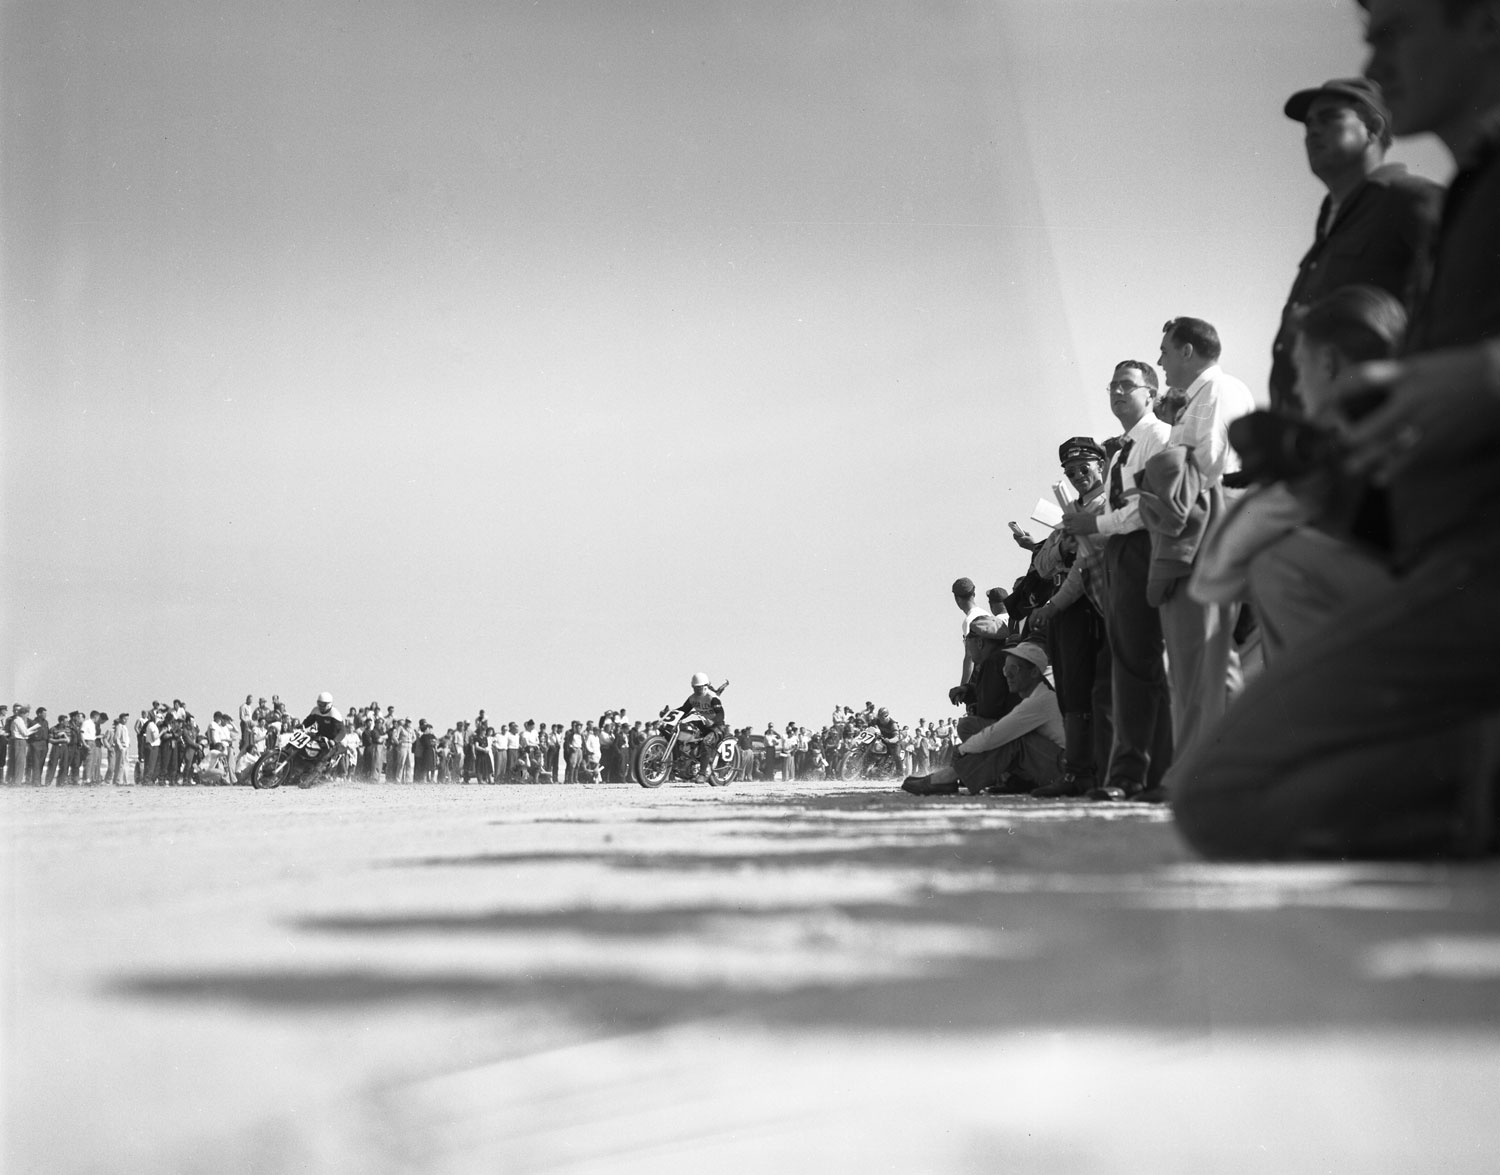 A sand crab's eye view of fans watching the races at Daytona.